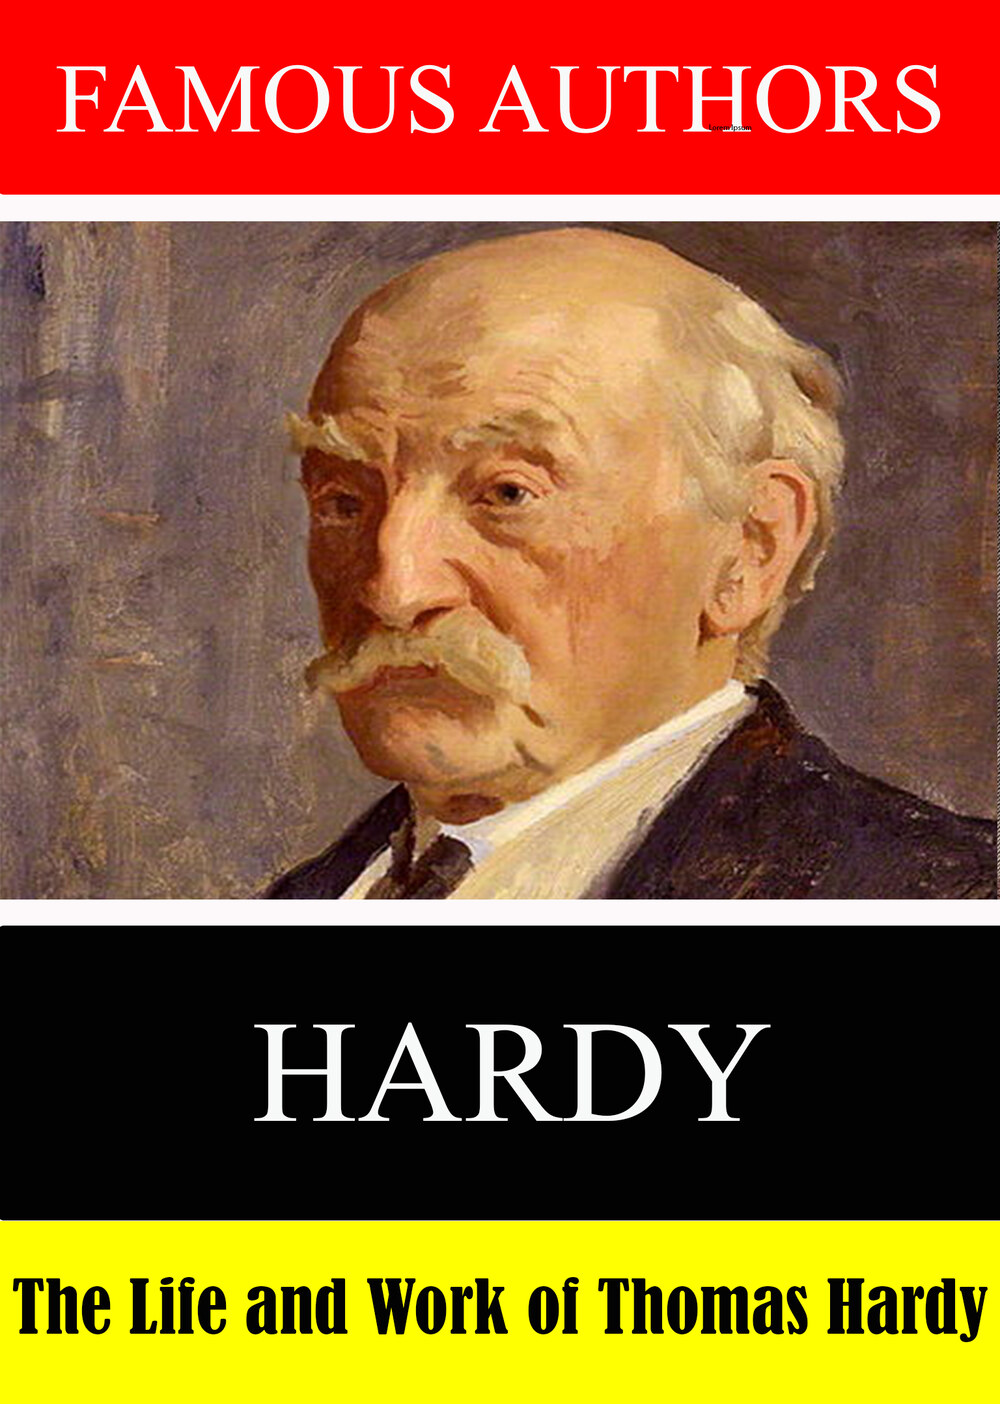 L7886 - Famous Authors: The Life and Work of Thomas Hardy